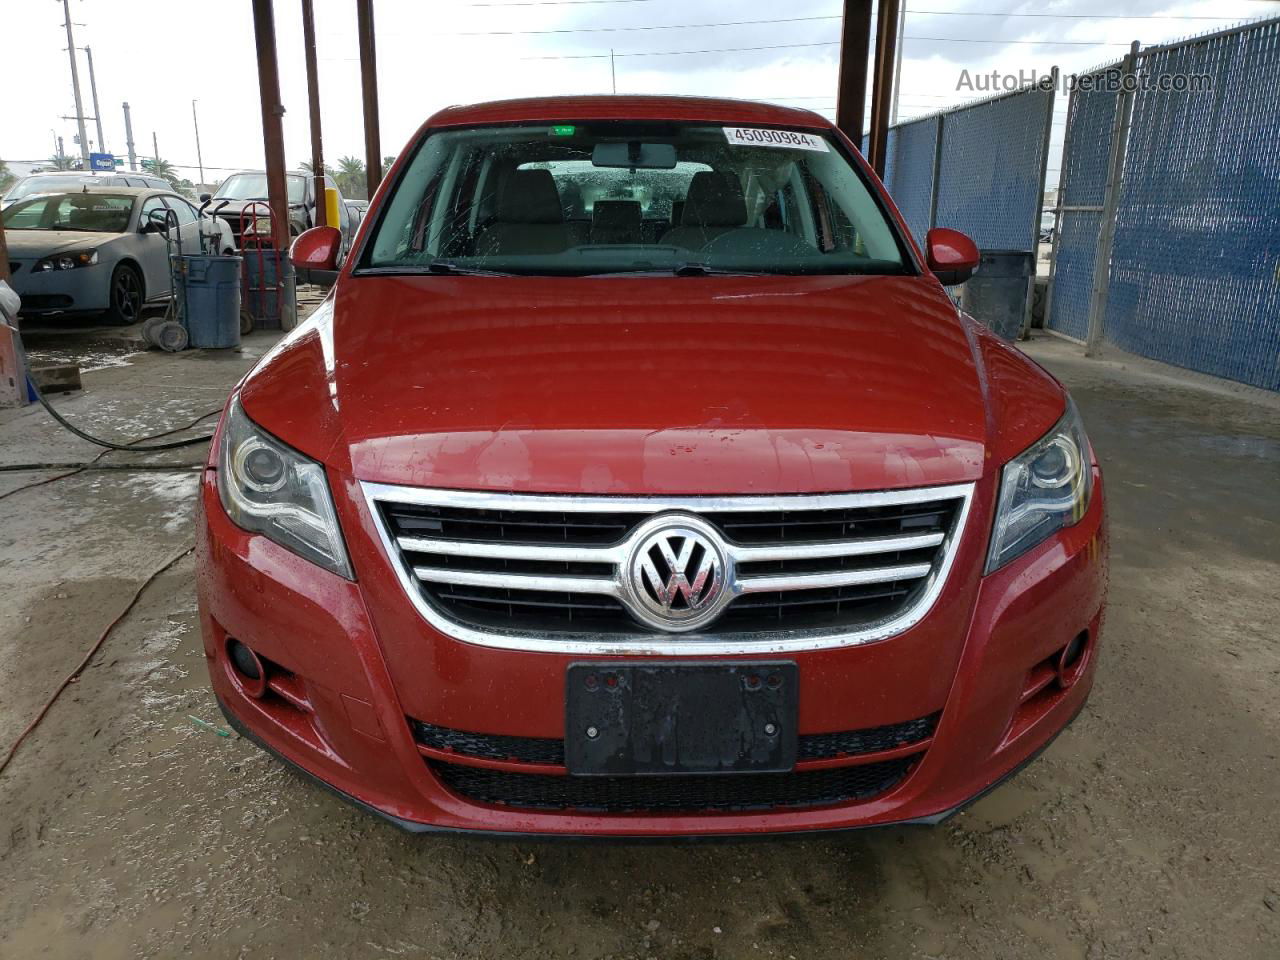 2010 Volkswagen Tiguan Se Red vin: WVGBV7AX7AW001879